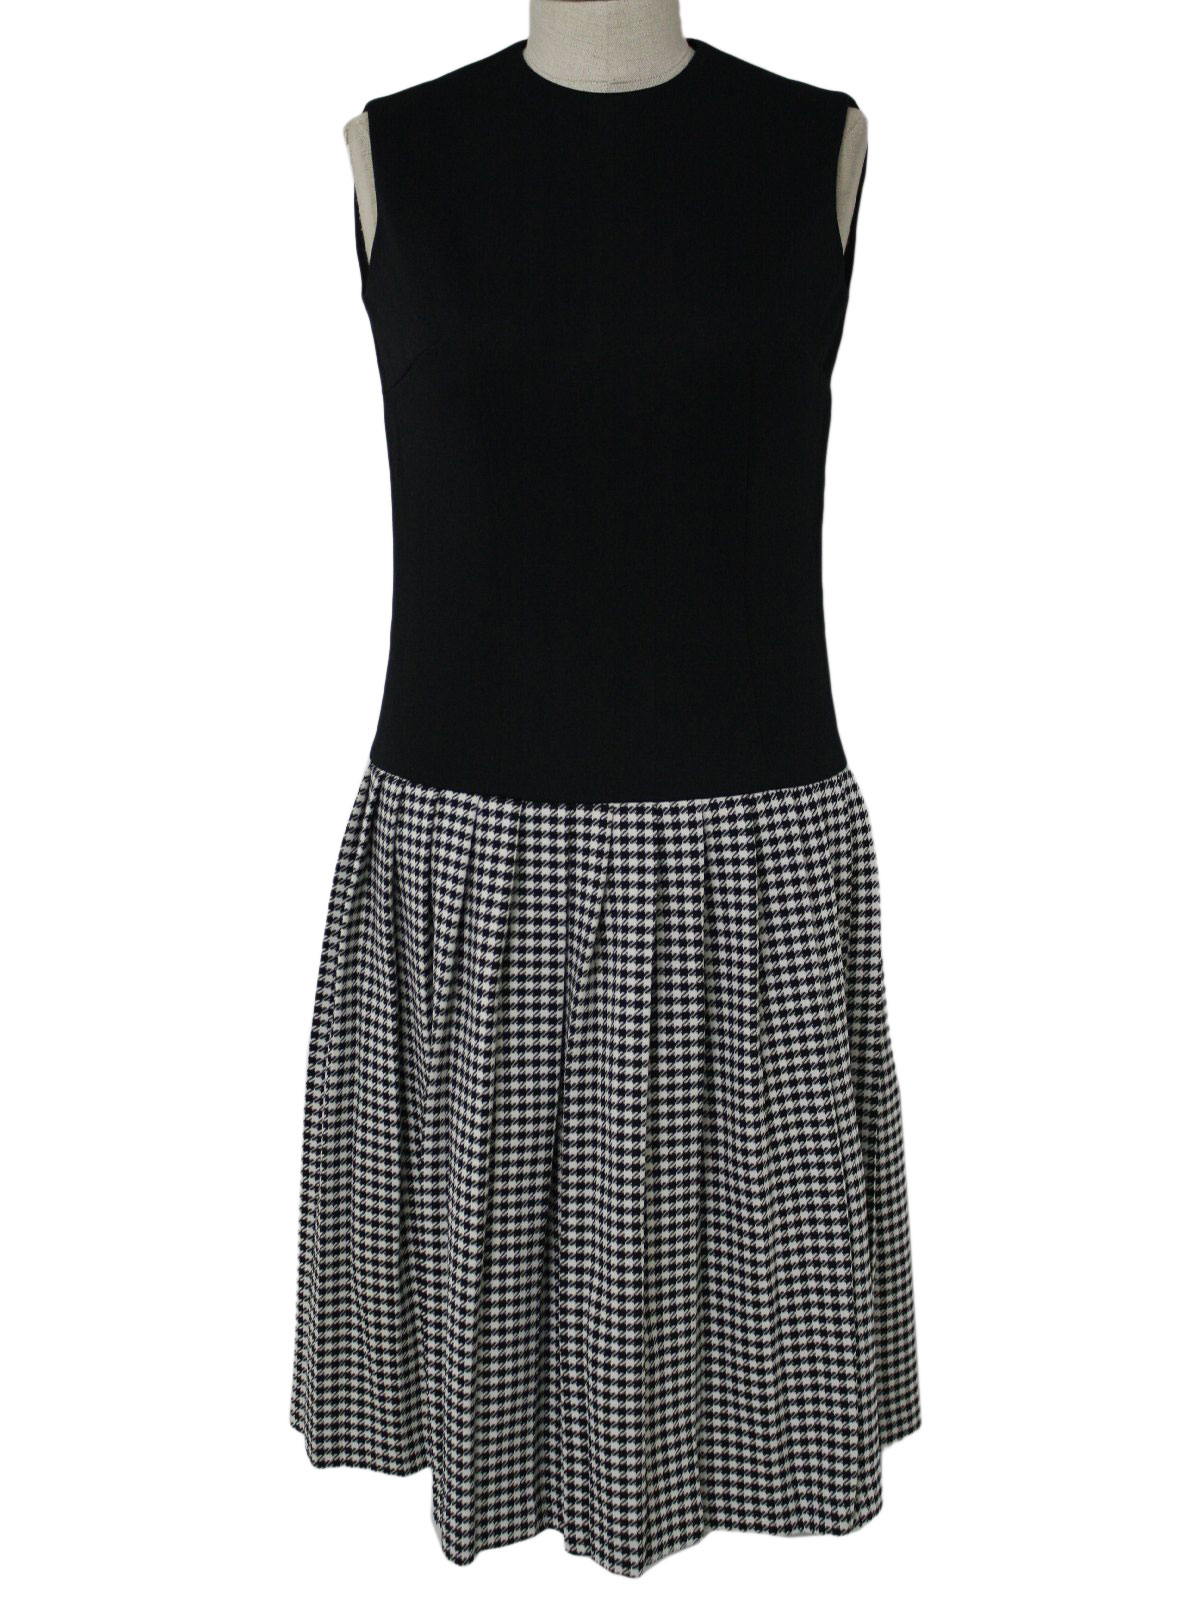 -Sears- Womens black and white polyester sleeveless mid length dress ...